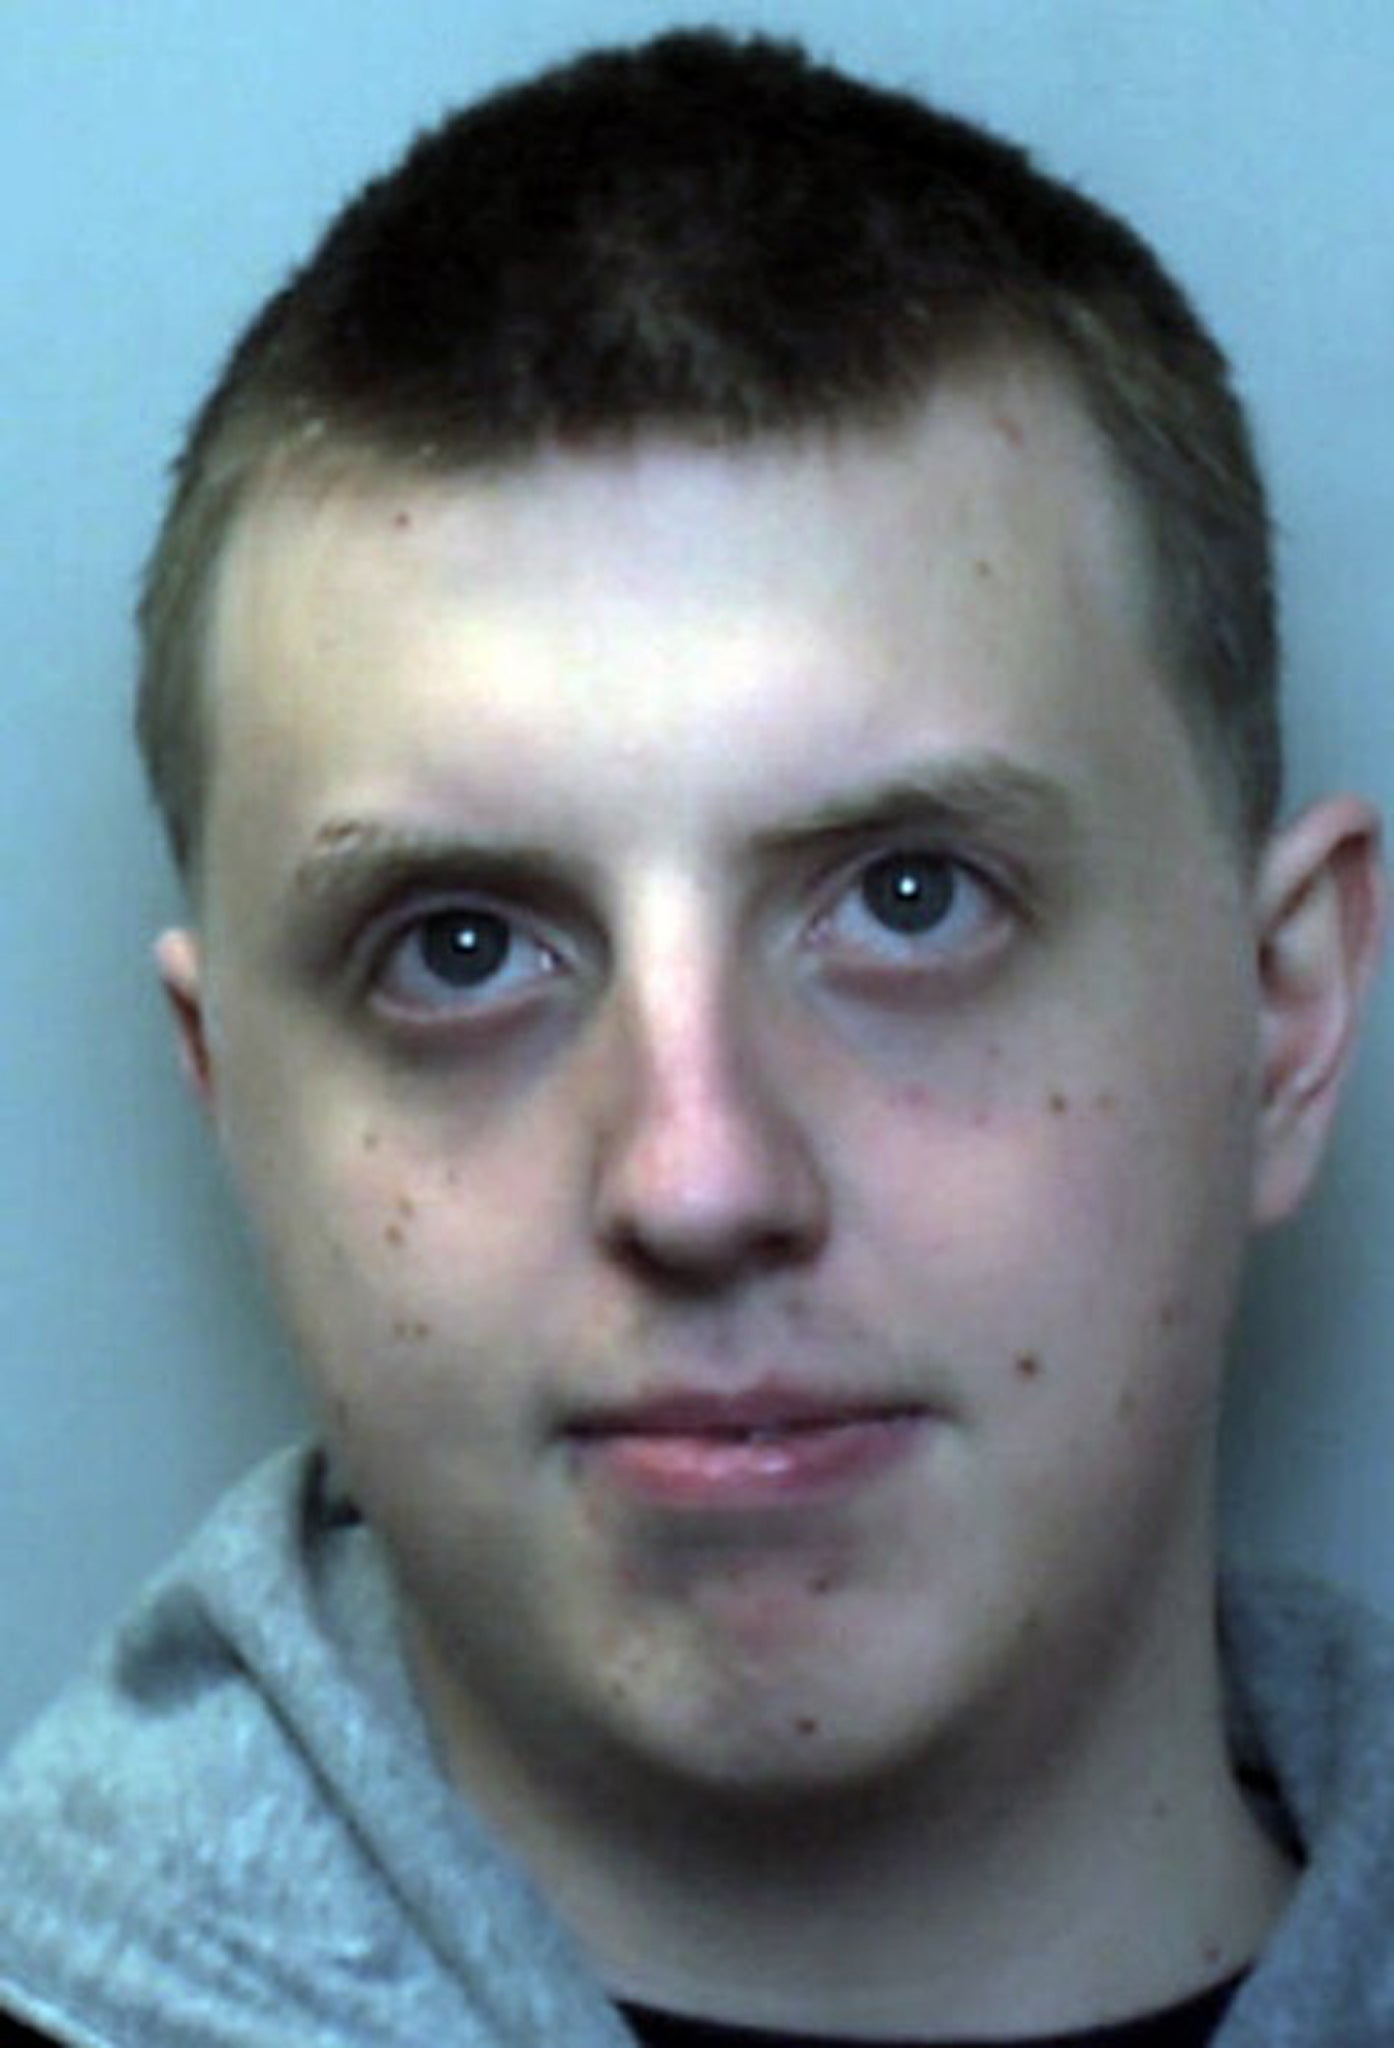 Christopher Weatherhead, 22, was given an 18-month sentence